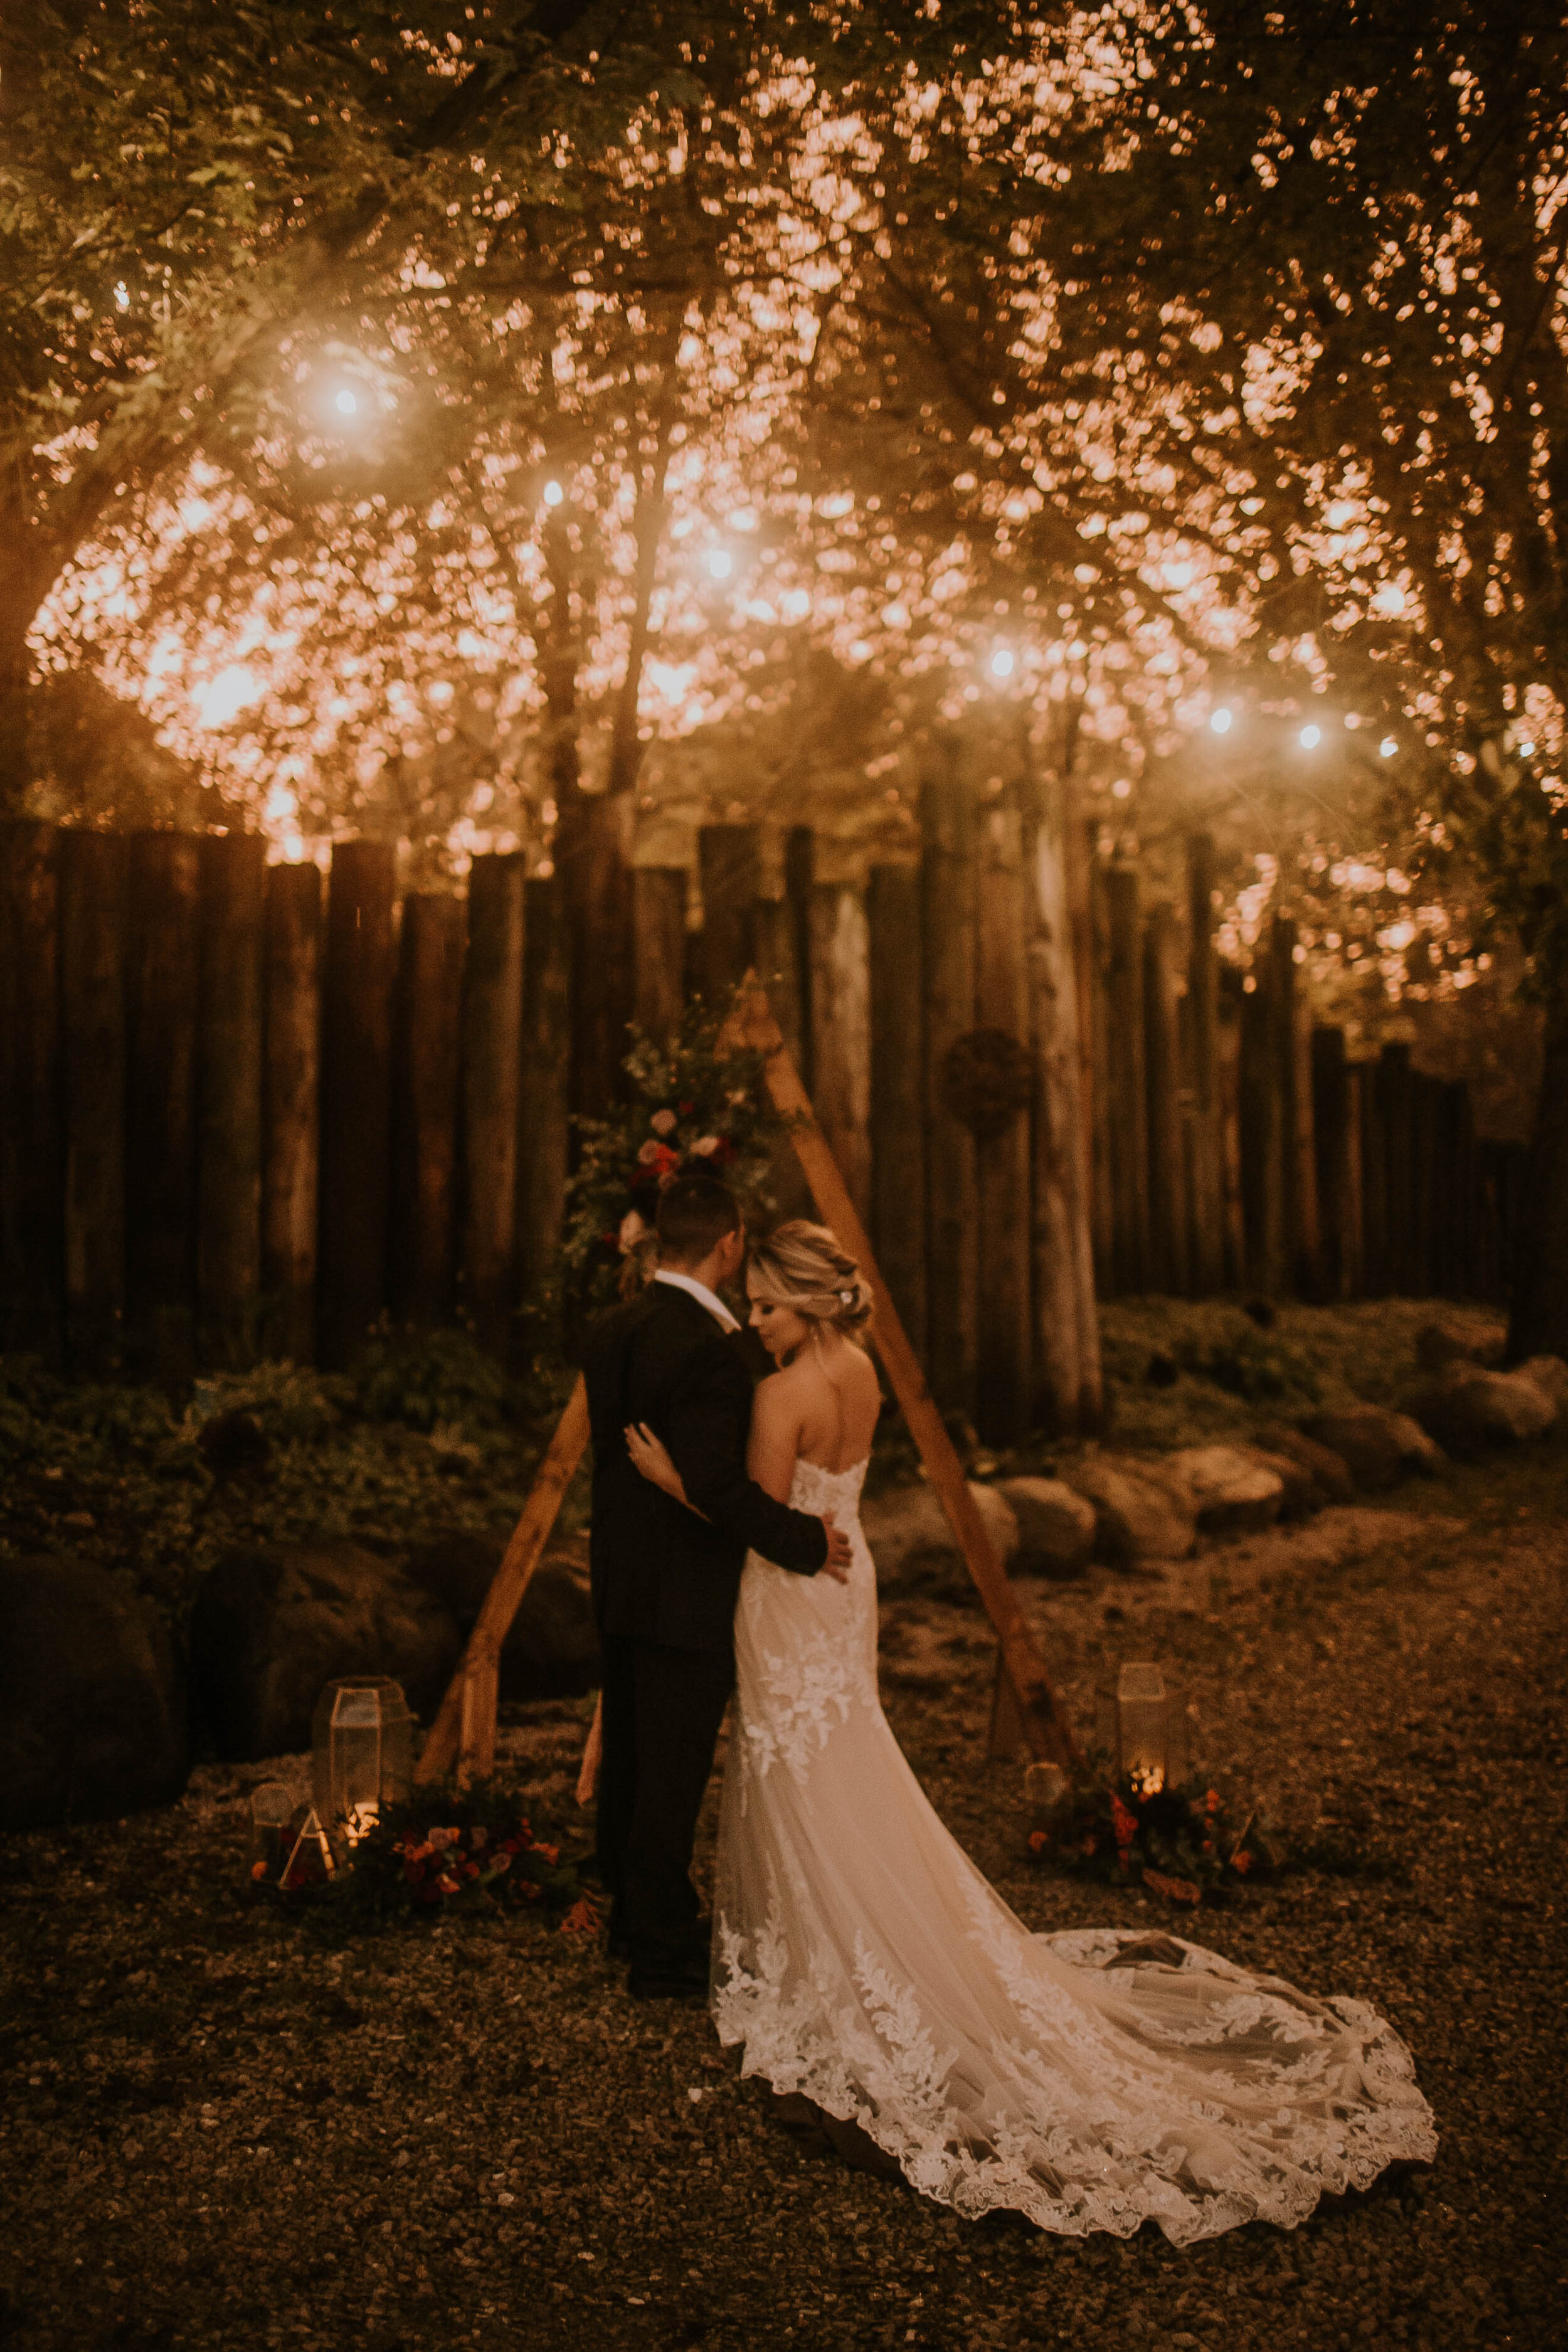 Moody Fall Wedding Styled Shoot captured by Gabrielle Daylor Photography. See more fall wedding ideas at CHItheeWED.com!